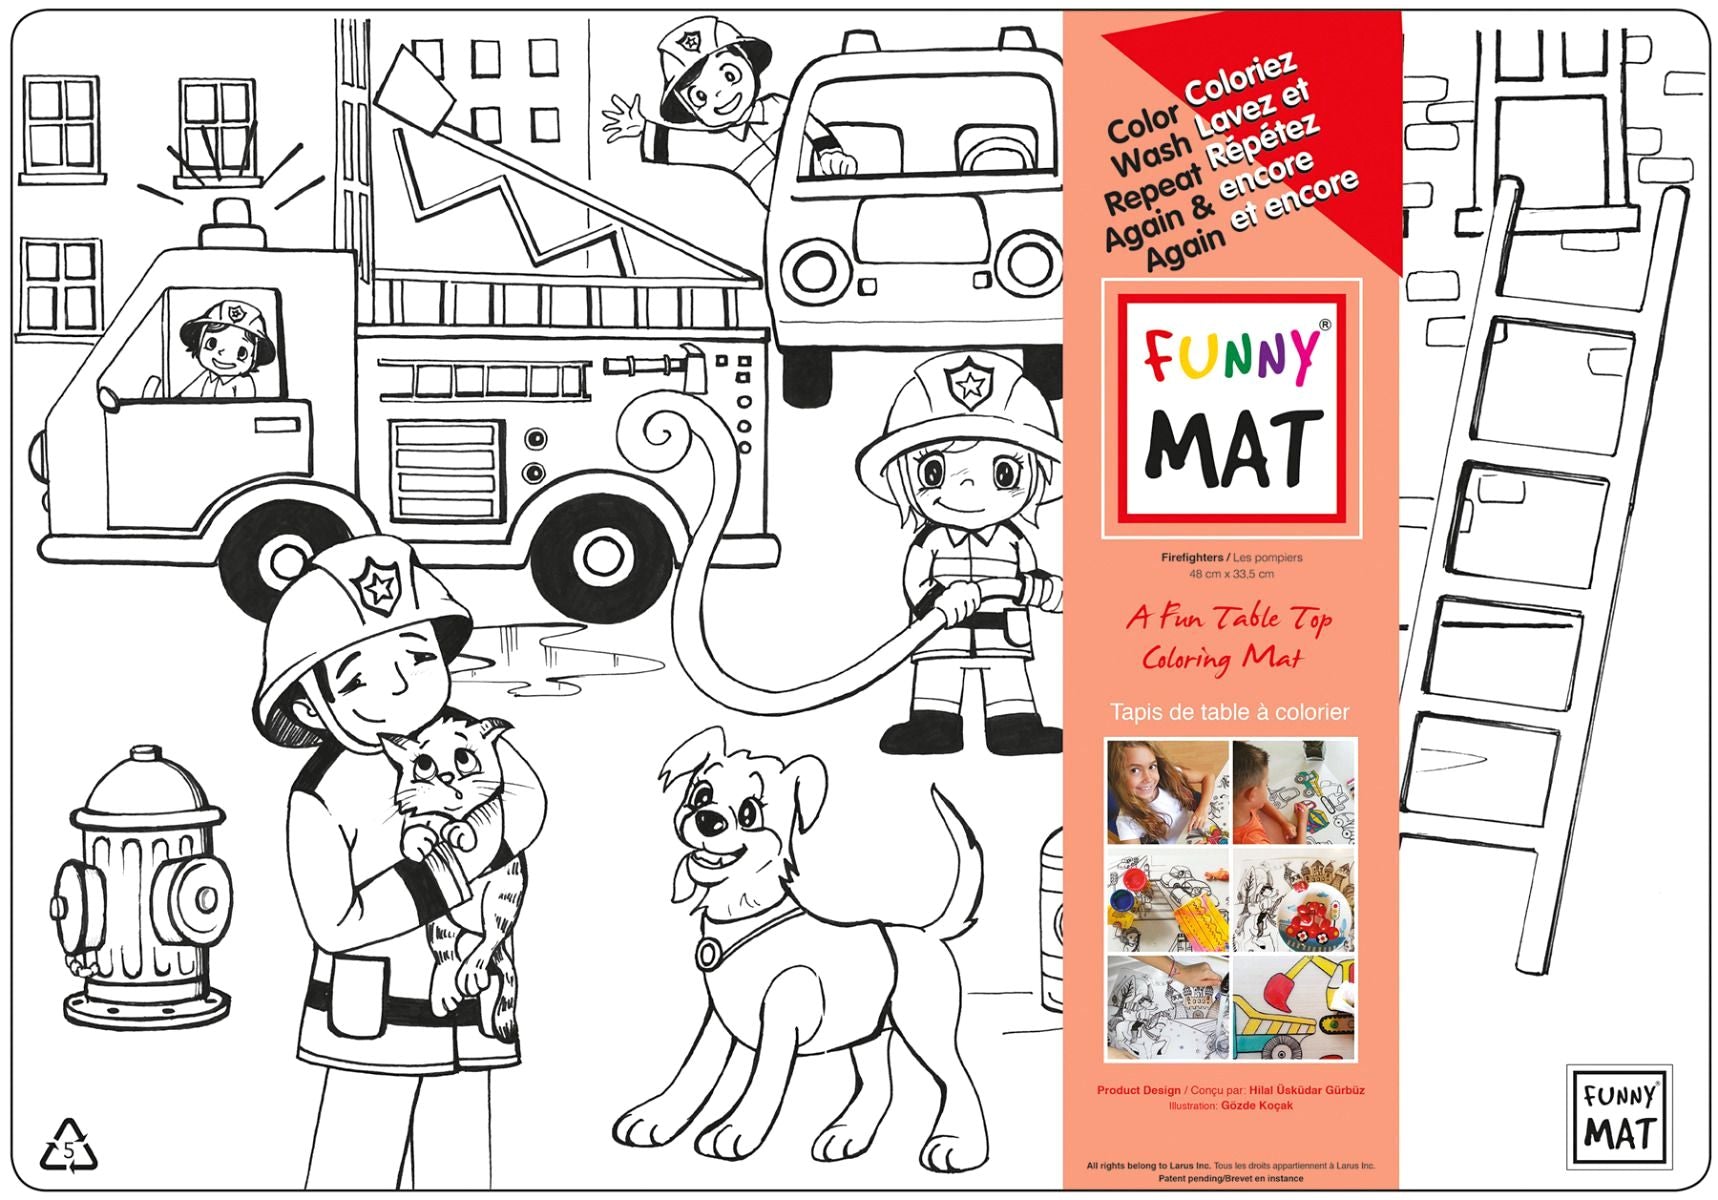 Funny MAT A Fun Table Top Coloring Mats - Fire Fighters (Transparent, Single)